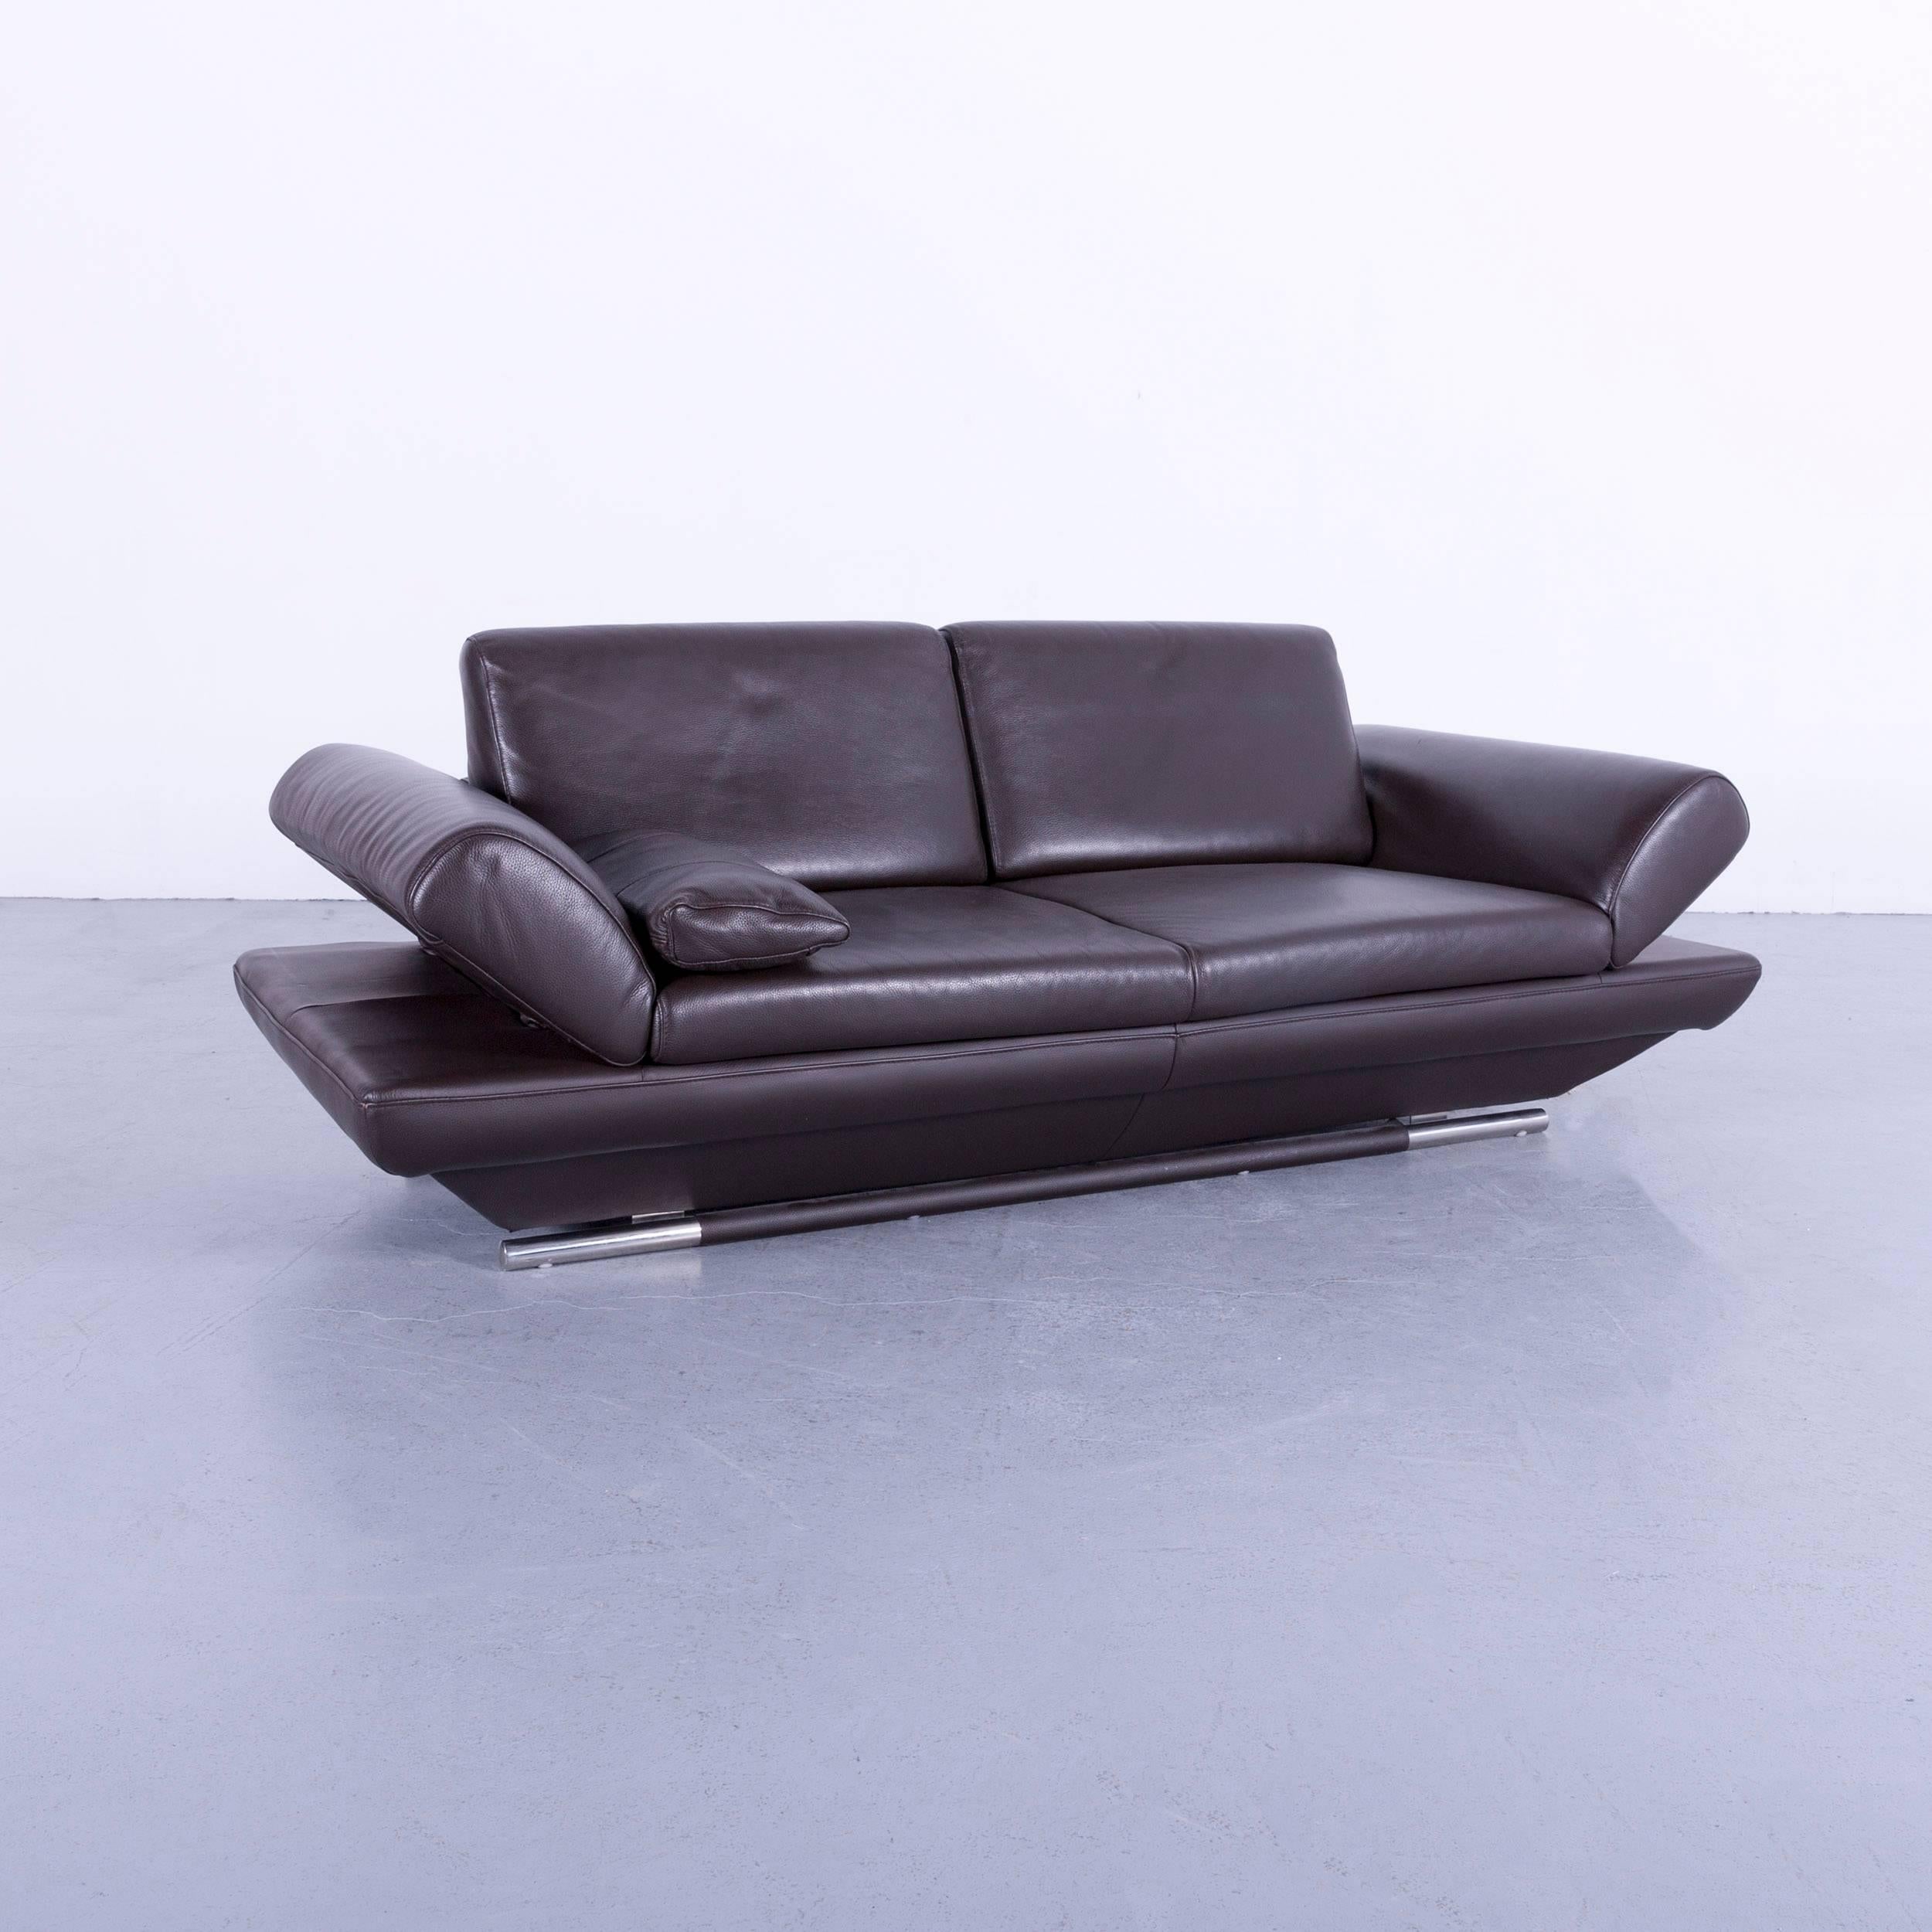 German Gio Mano Leather Sofa Brown Two-Seat Function Couch